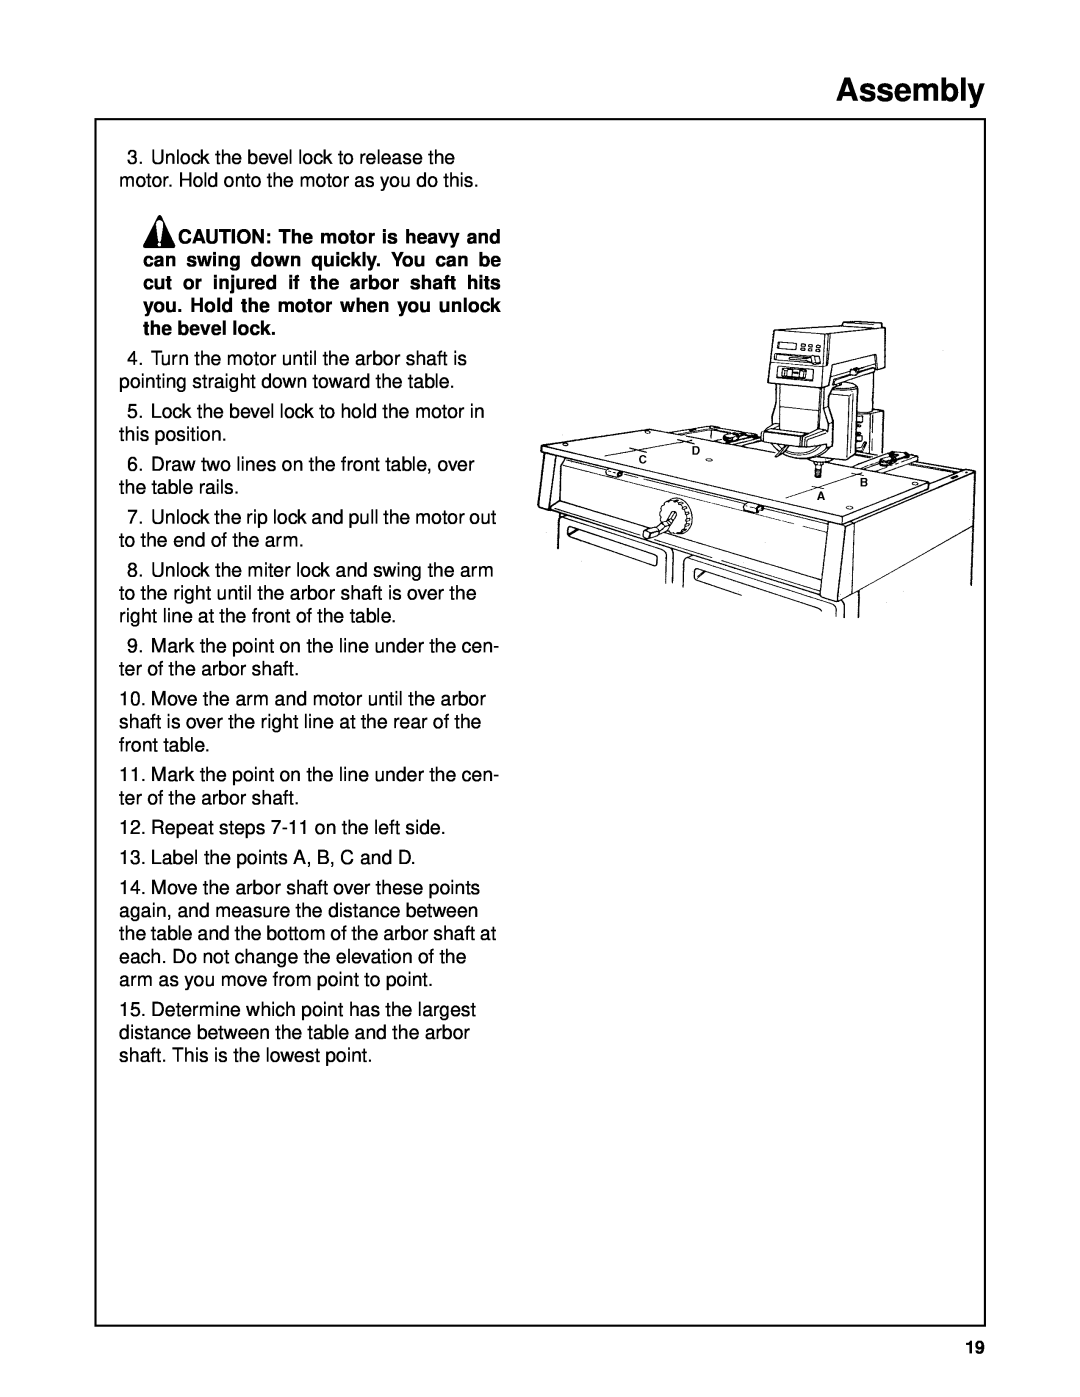 Craftsman 509398, 509399 owner manual Assembly, Lock the bevel lock to hold the motor in this position 